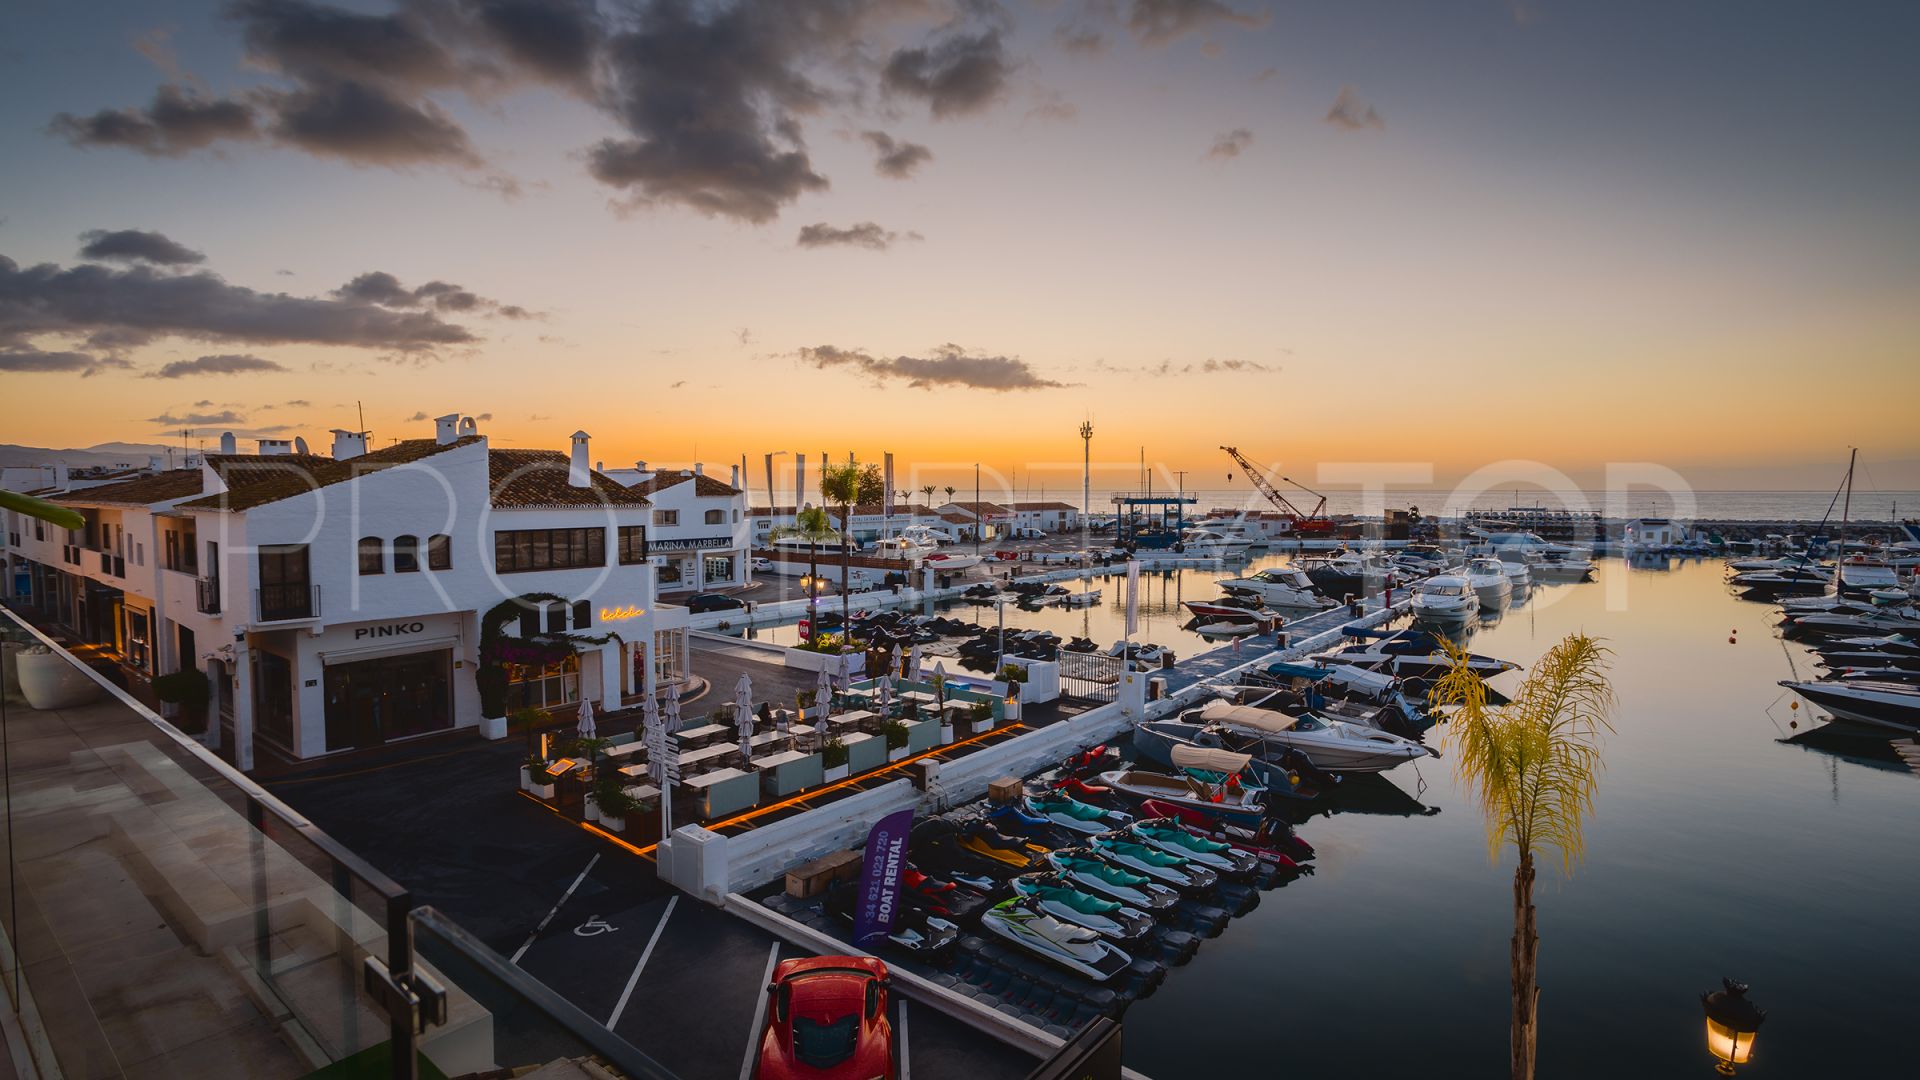 For sale 4 bedrooms penthouse in Marina Banus